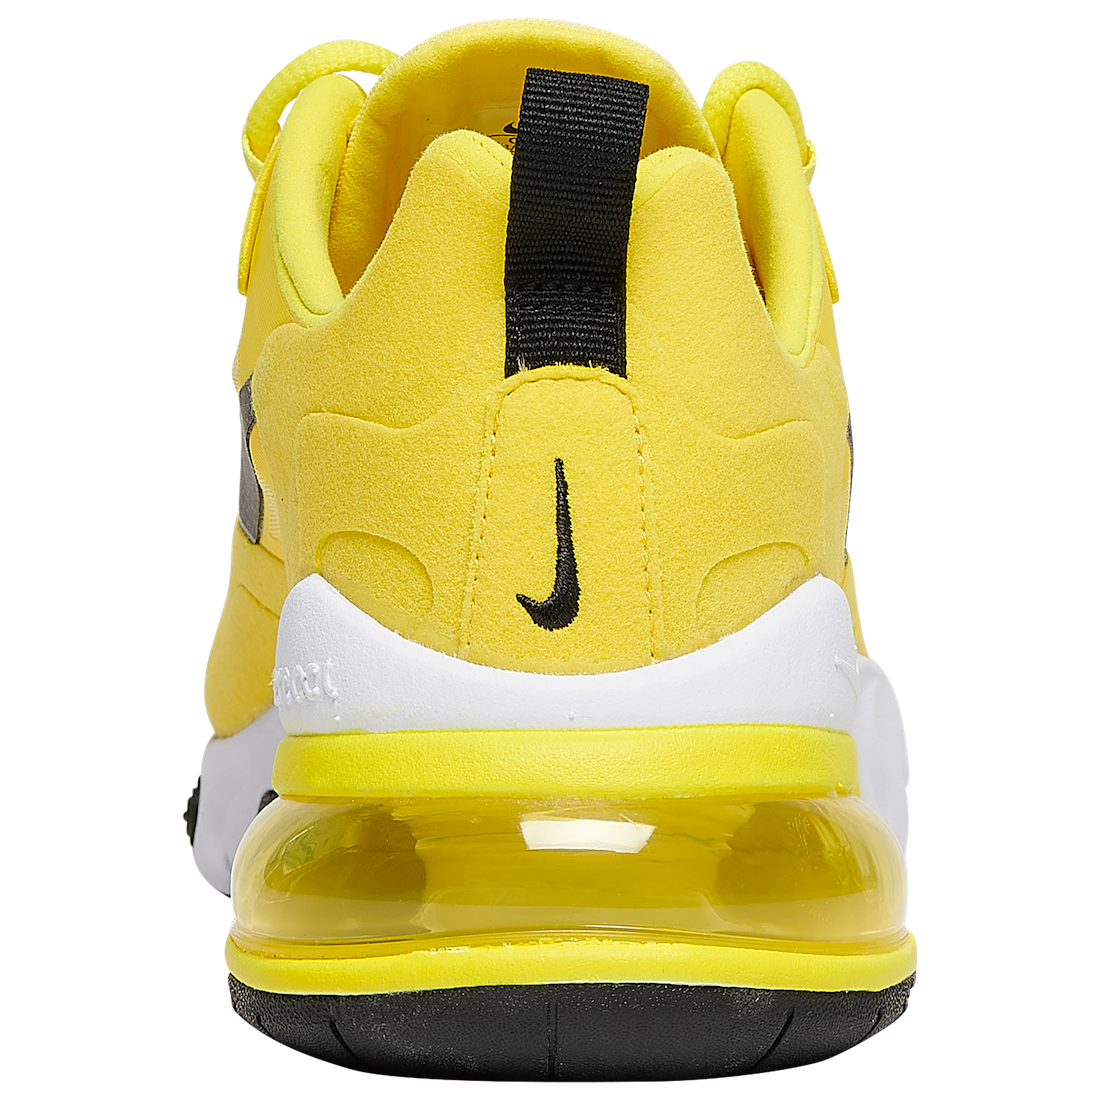 black and yellow nikes womens